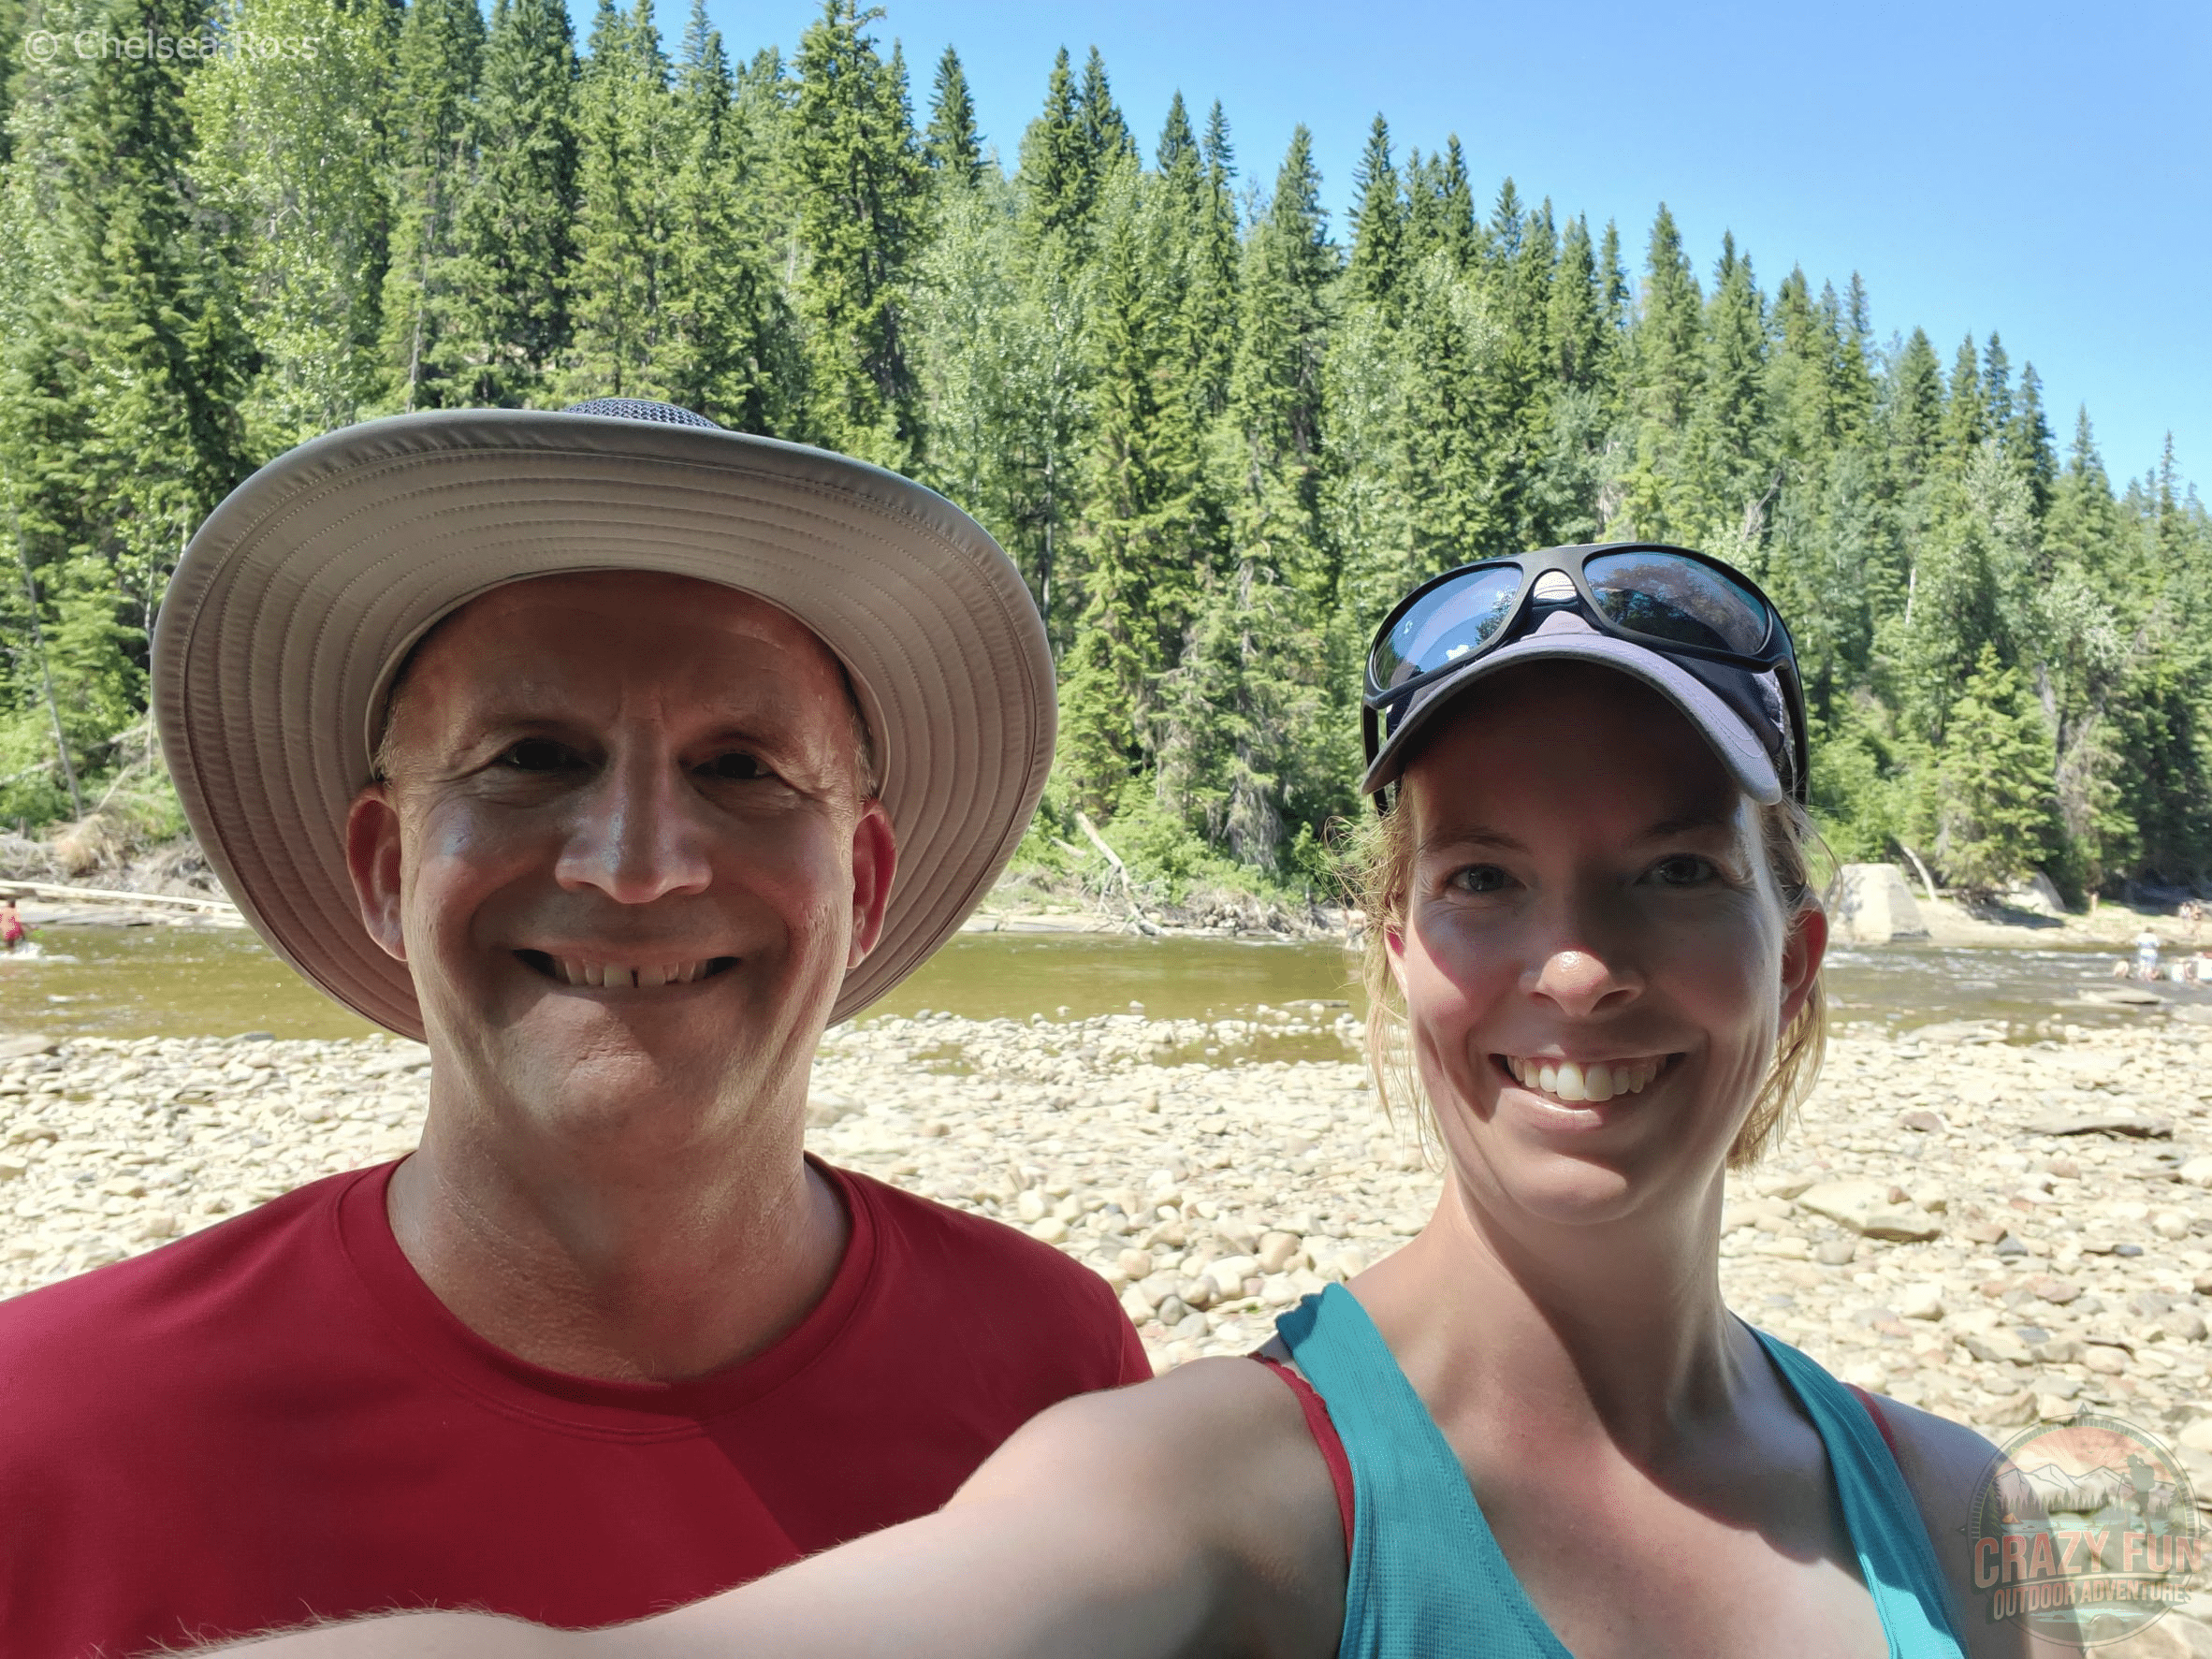 Edmonton Day Trips: Fred in red shirt and I in turquoise tank top taking a selfie in front of Pembina River with trees in the background.